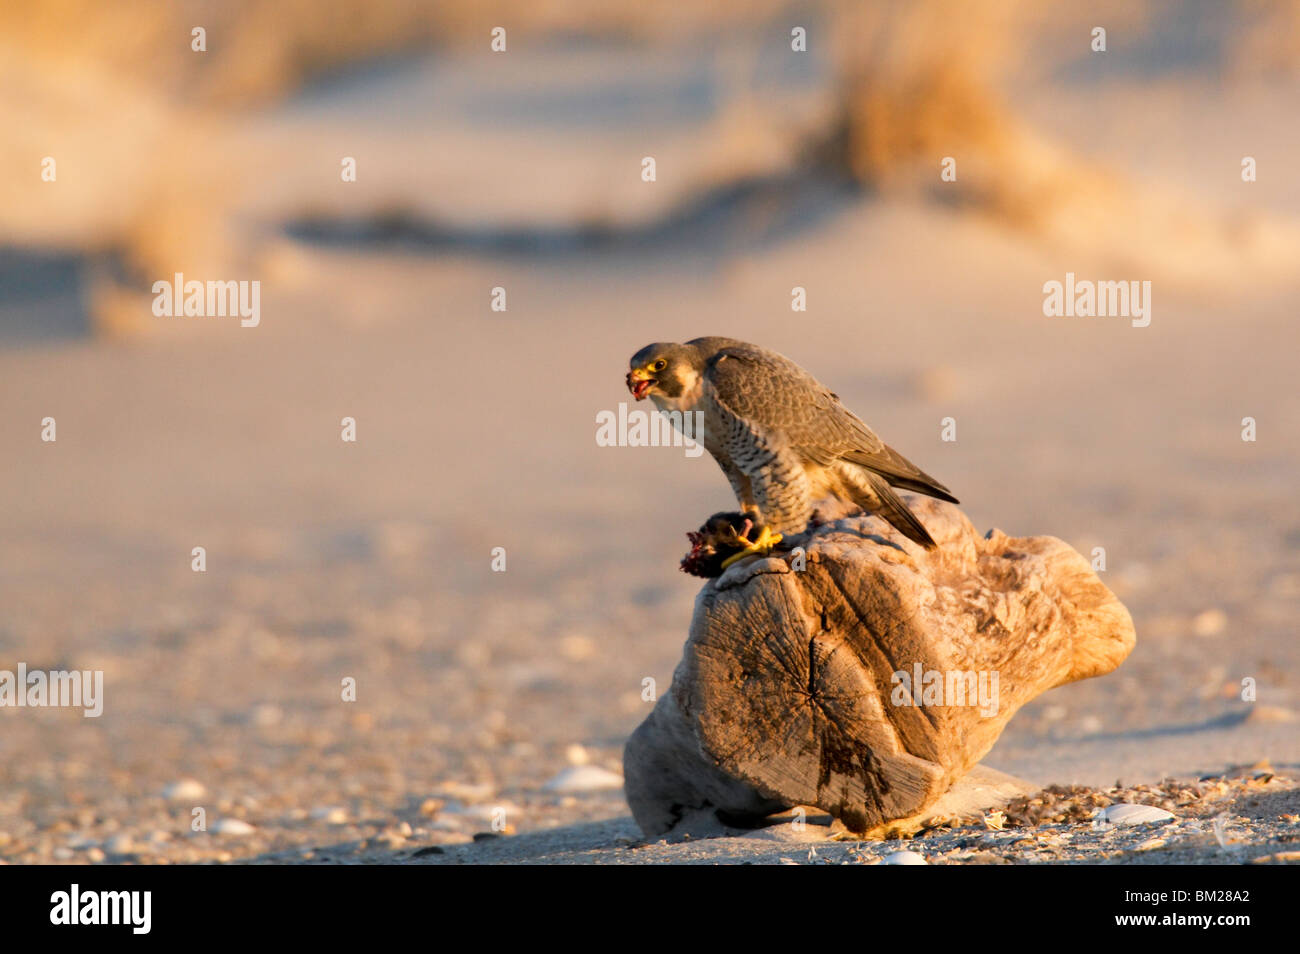 Adult Peregrine Falcon eating a Dovekie on the beach at sunrise. Stock Photo